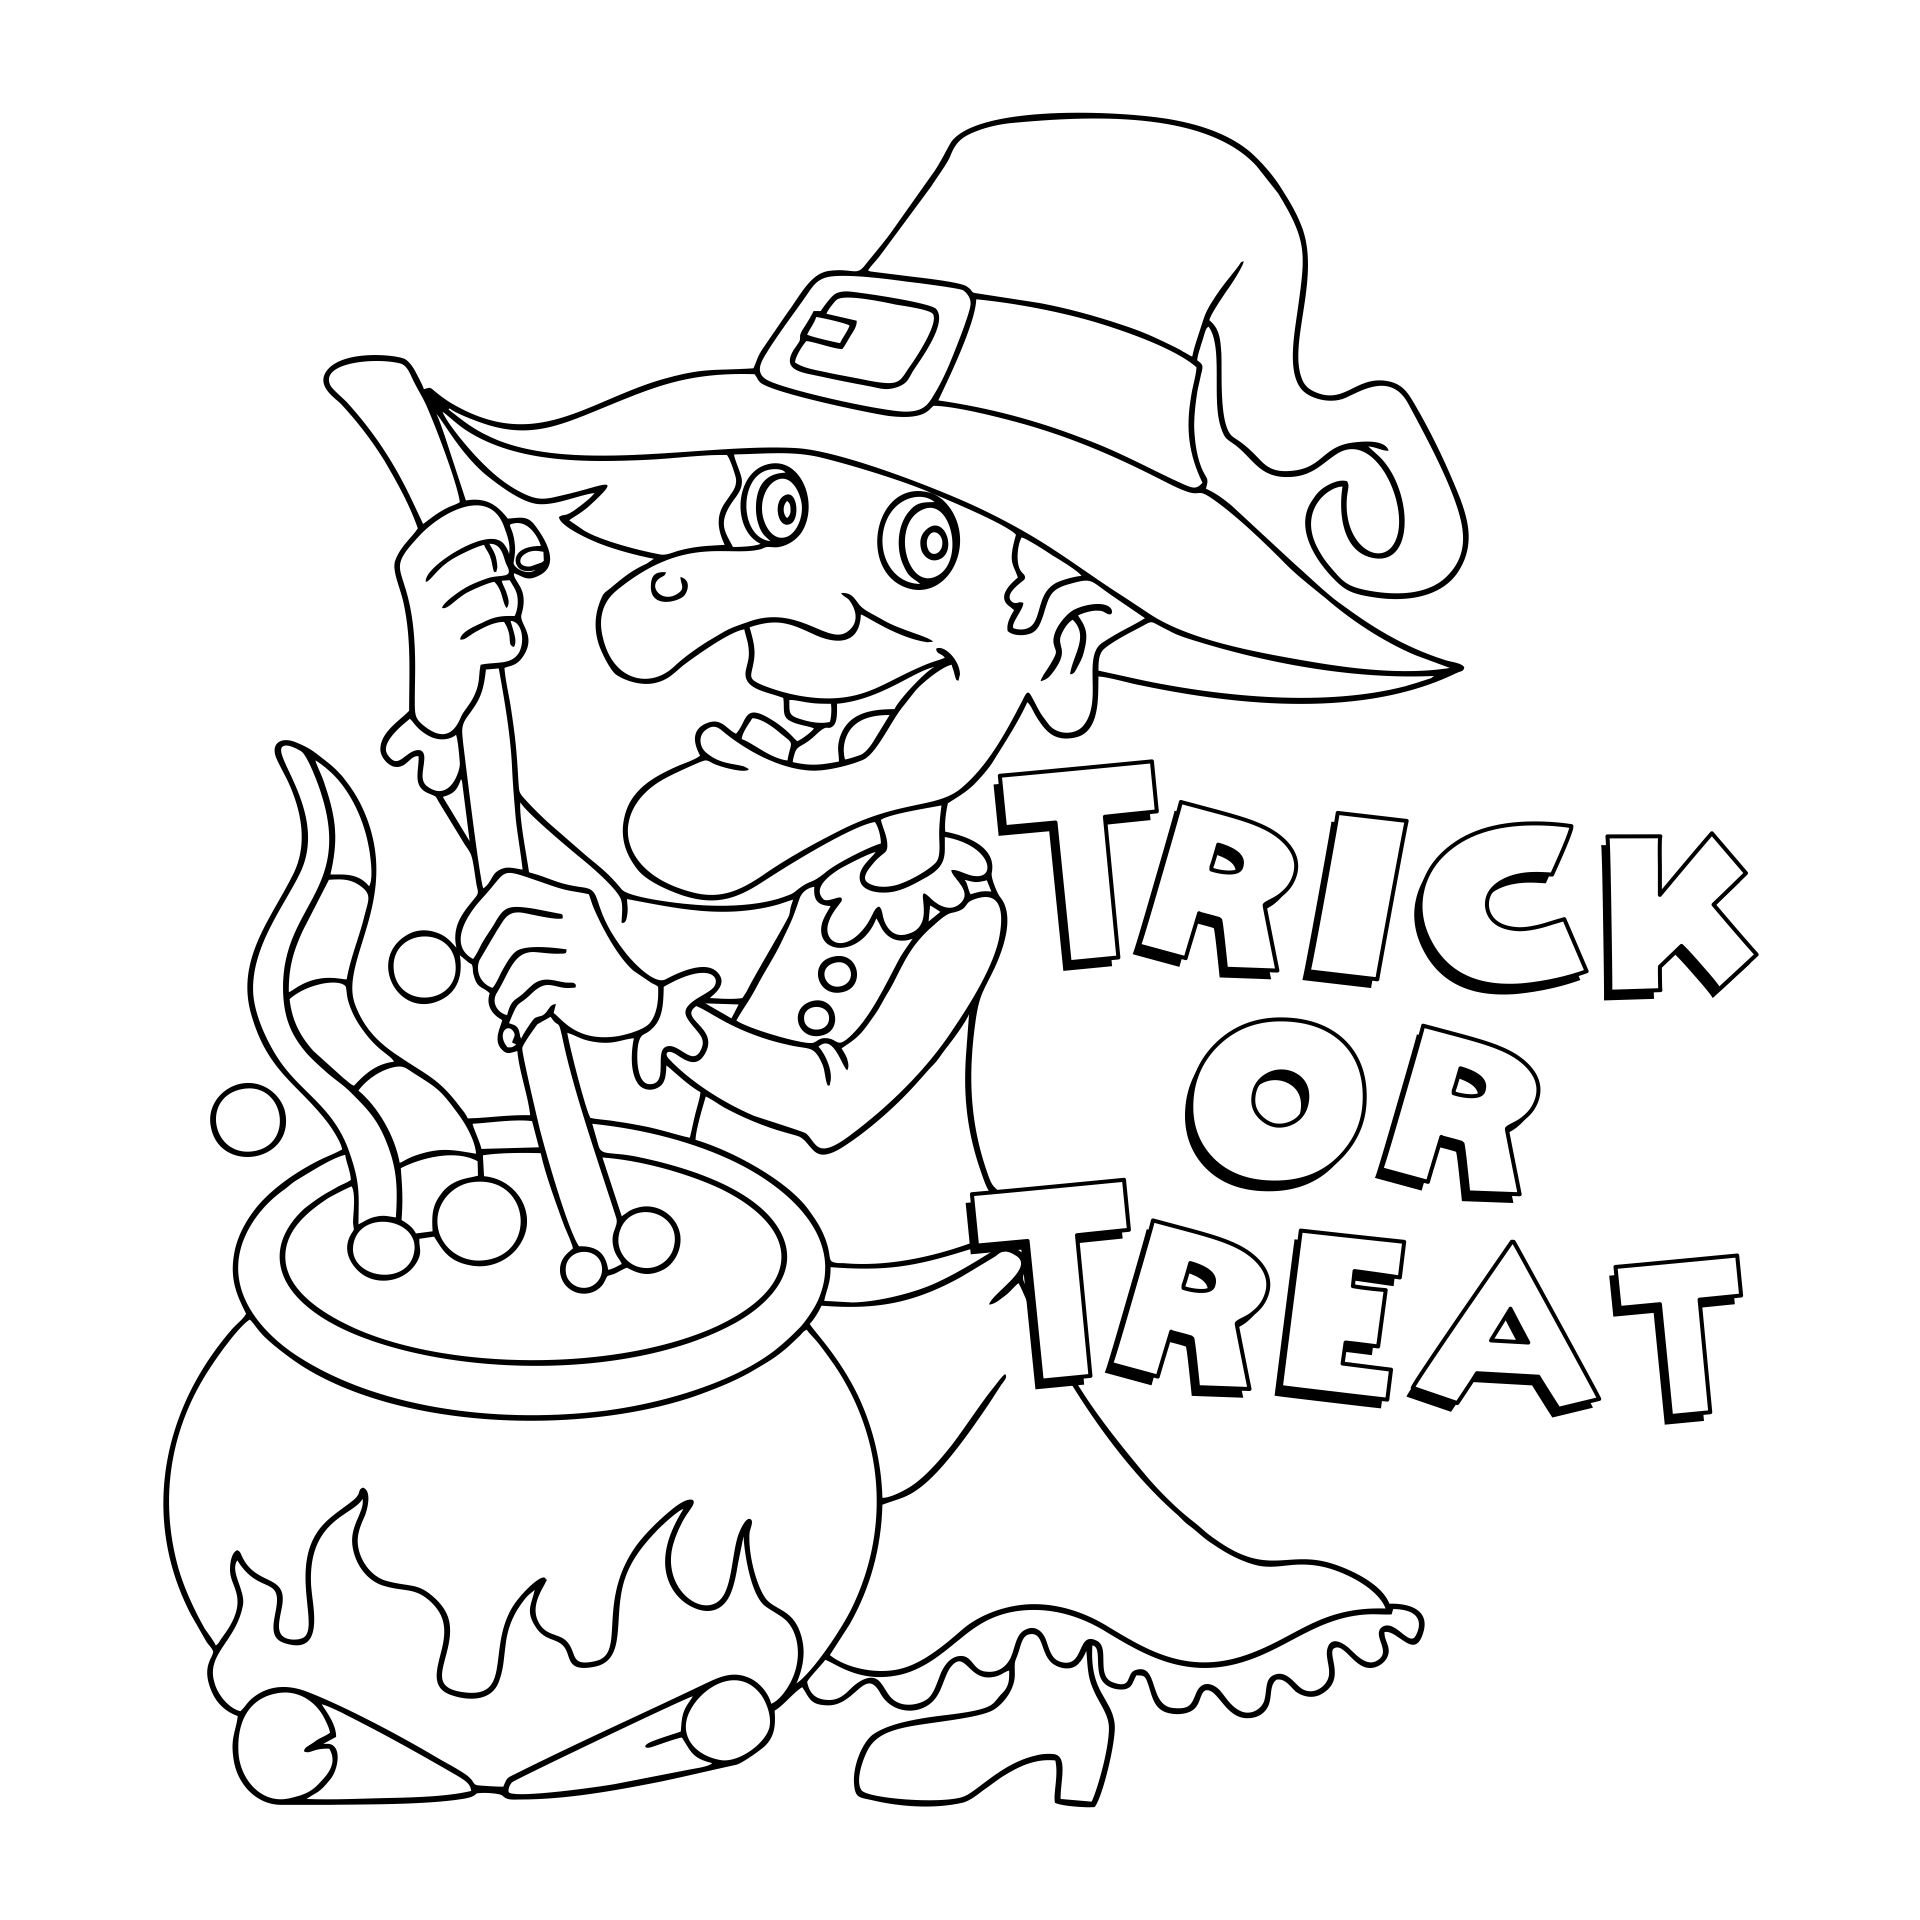 Halloween Coloring Pages And Activities